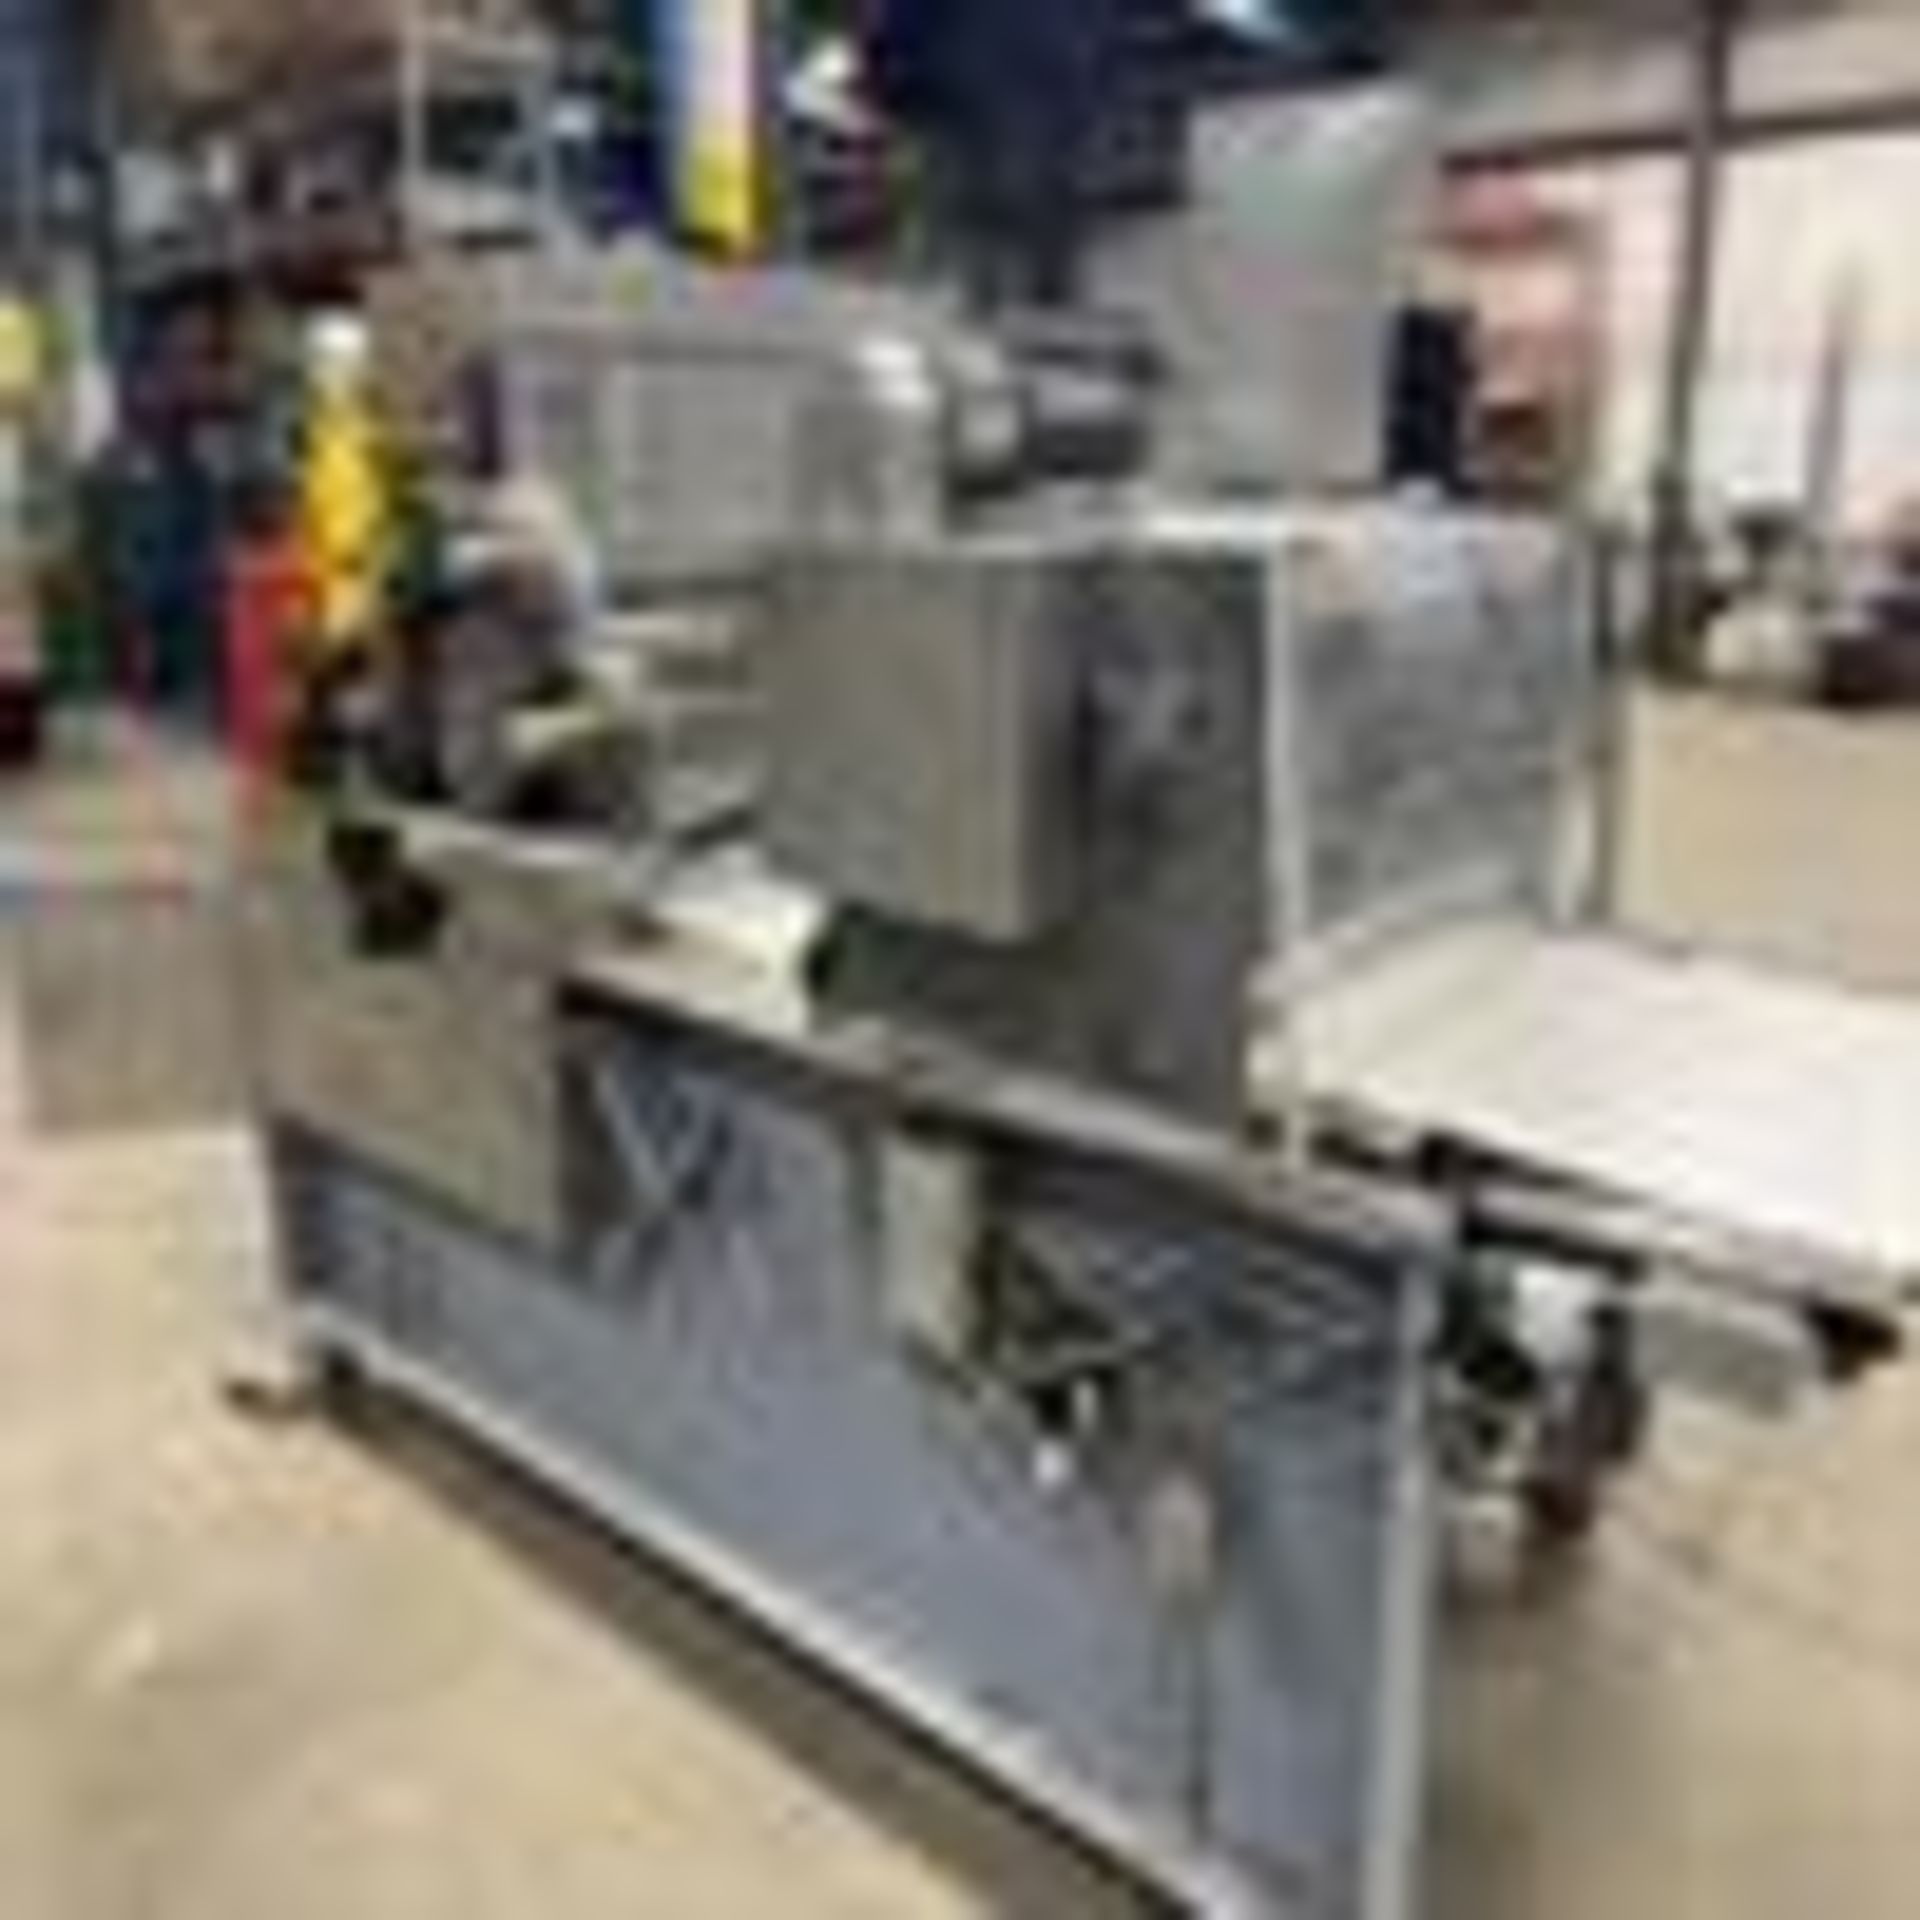 American Machine and Design 34" Co-Extruder with Guillotine Cutter - 34" wide Co-Extrusion head - - Image 13 of 13